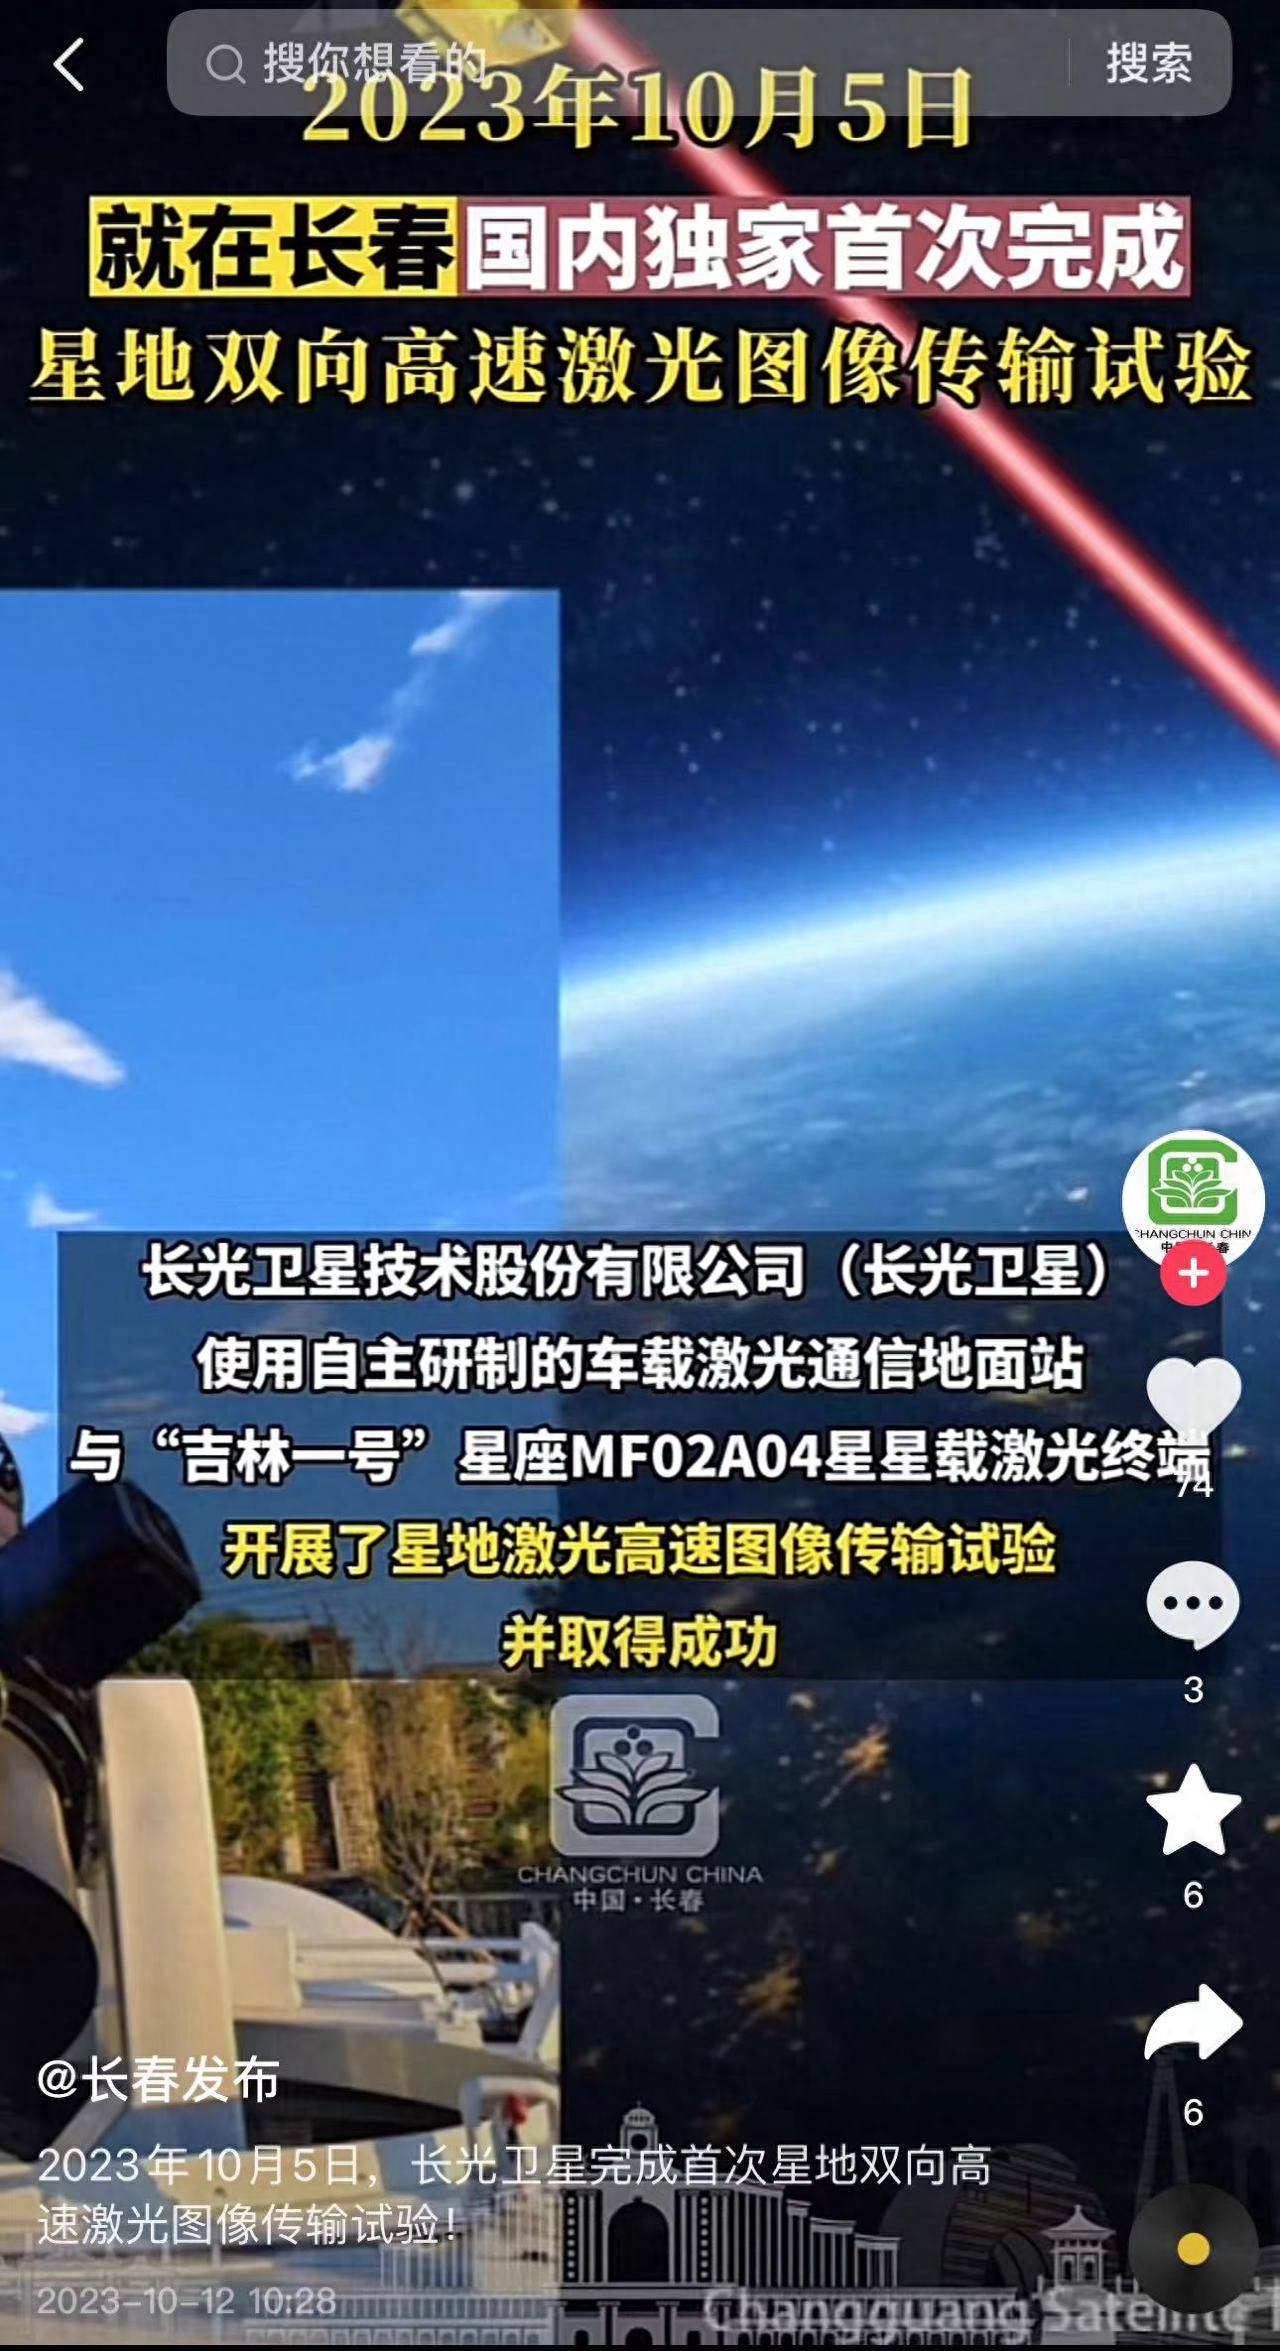 Today's Hot List | China's First Time! Good news from Jilin Changguang Satellite again!